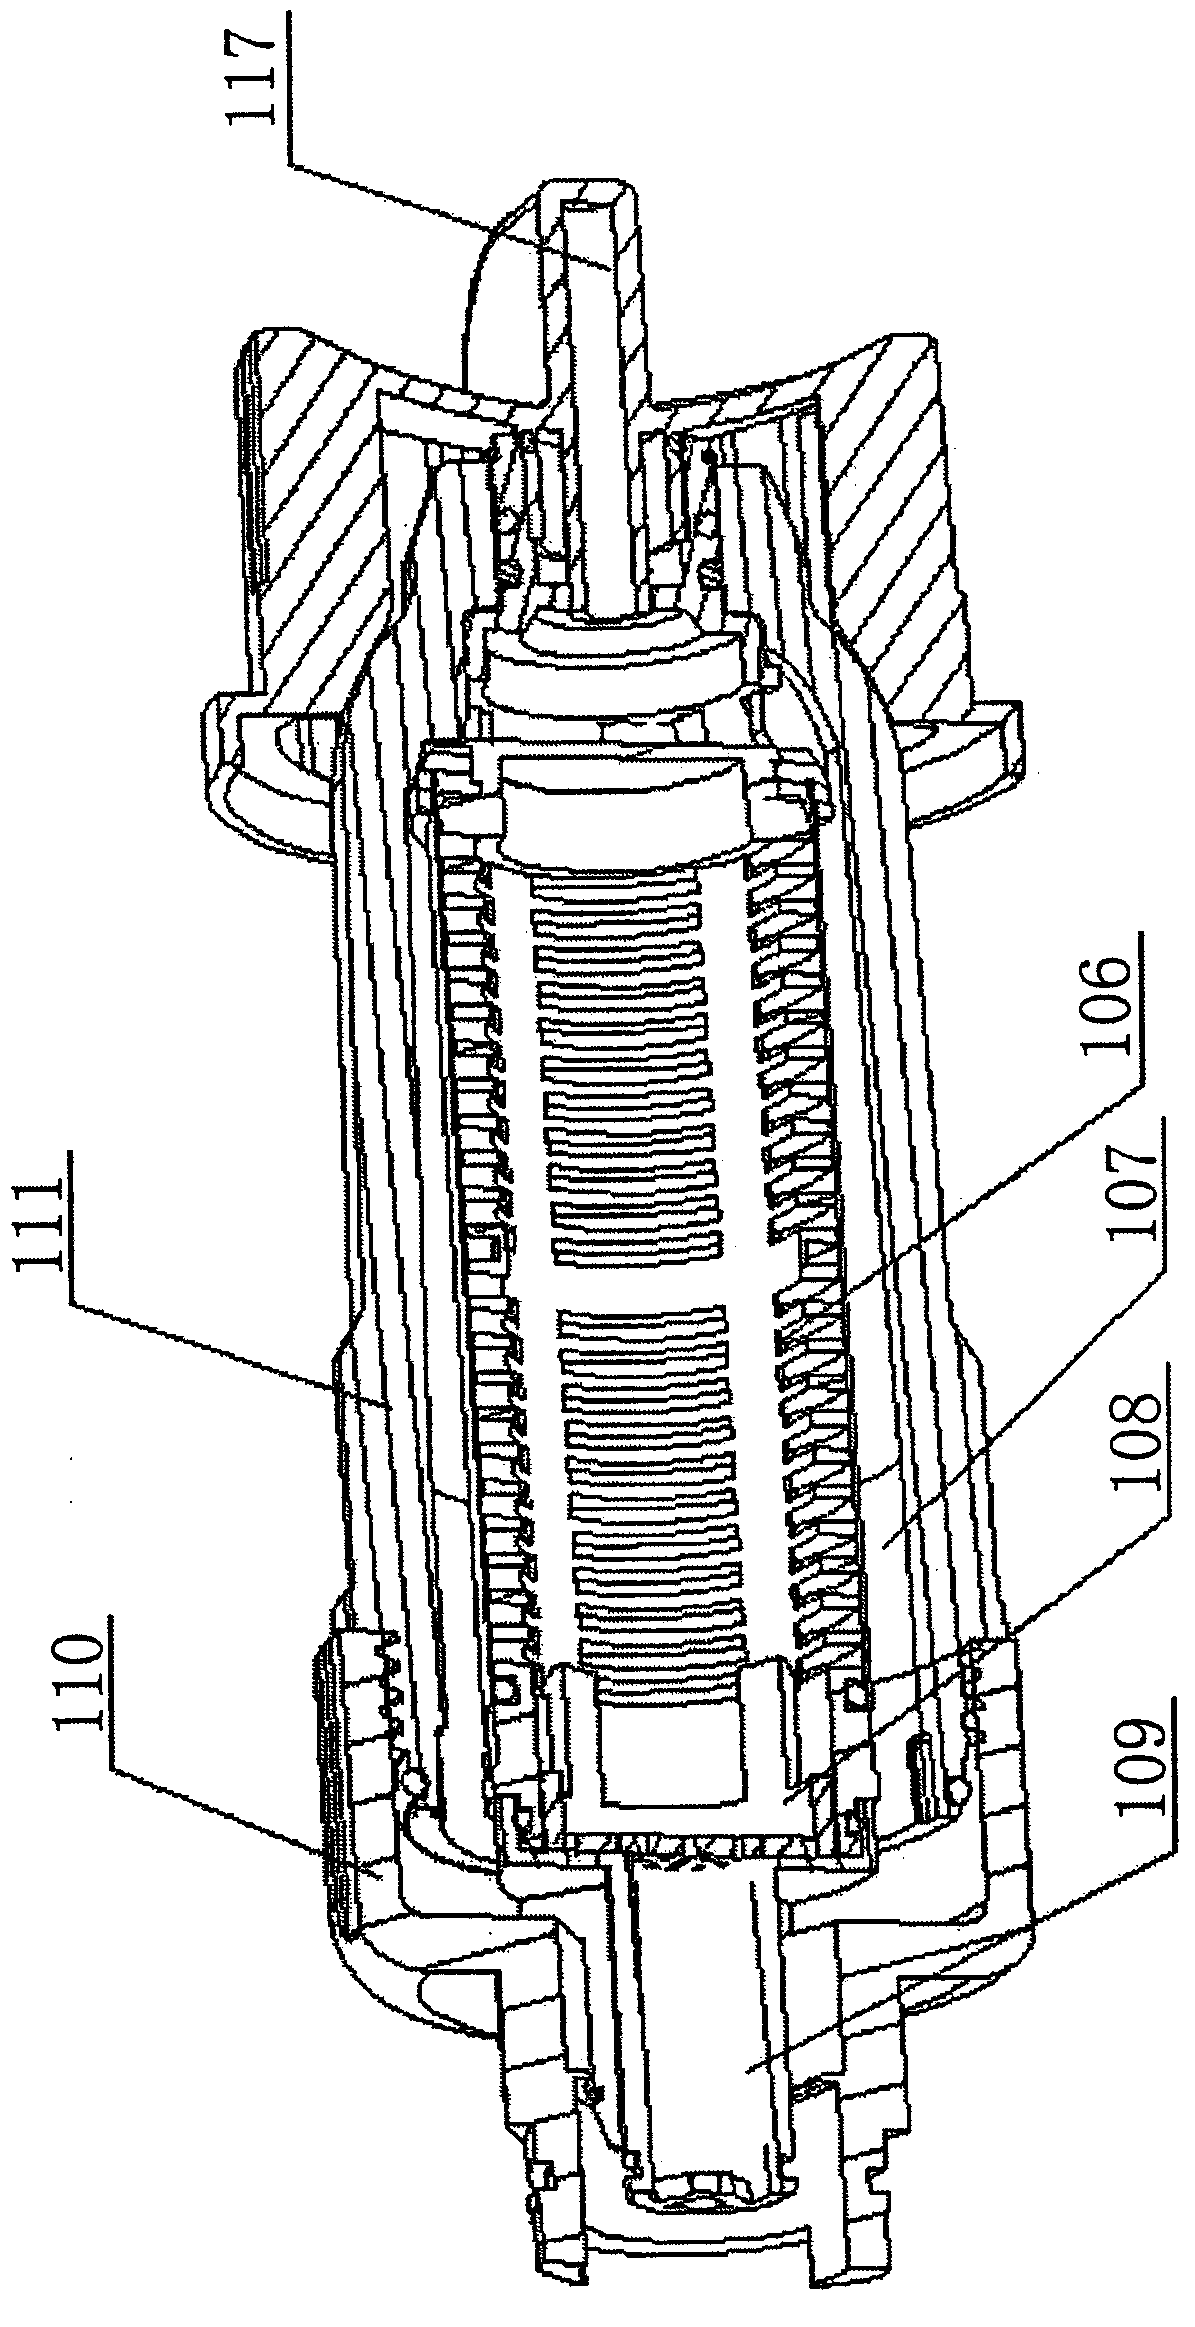 Power generation and water purification apparatus